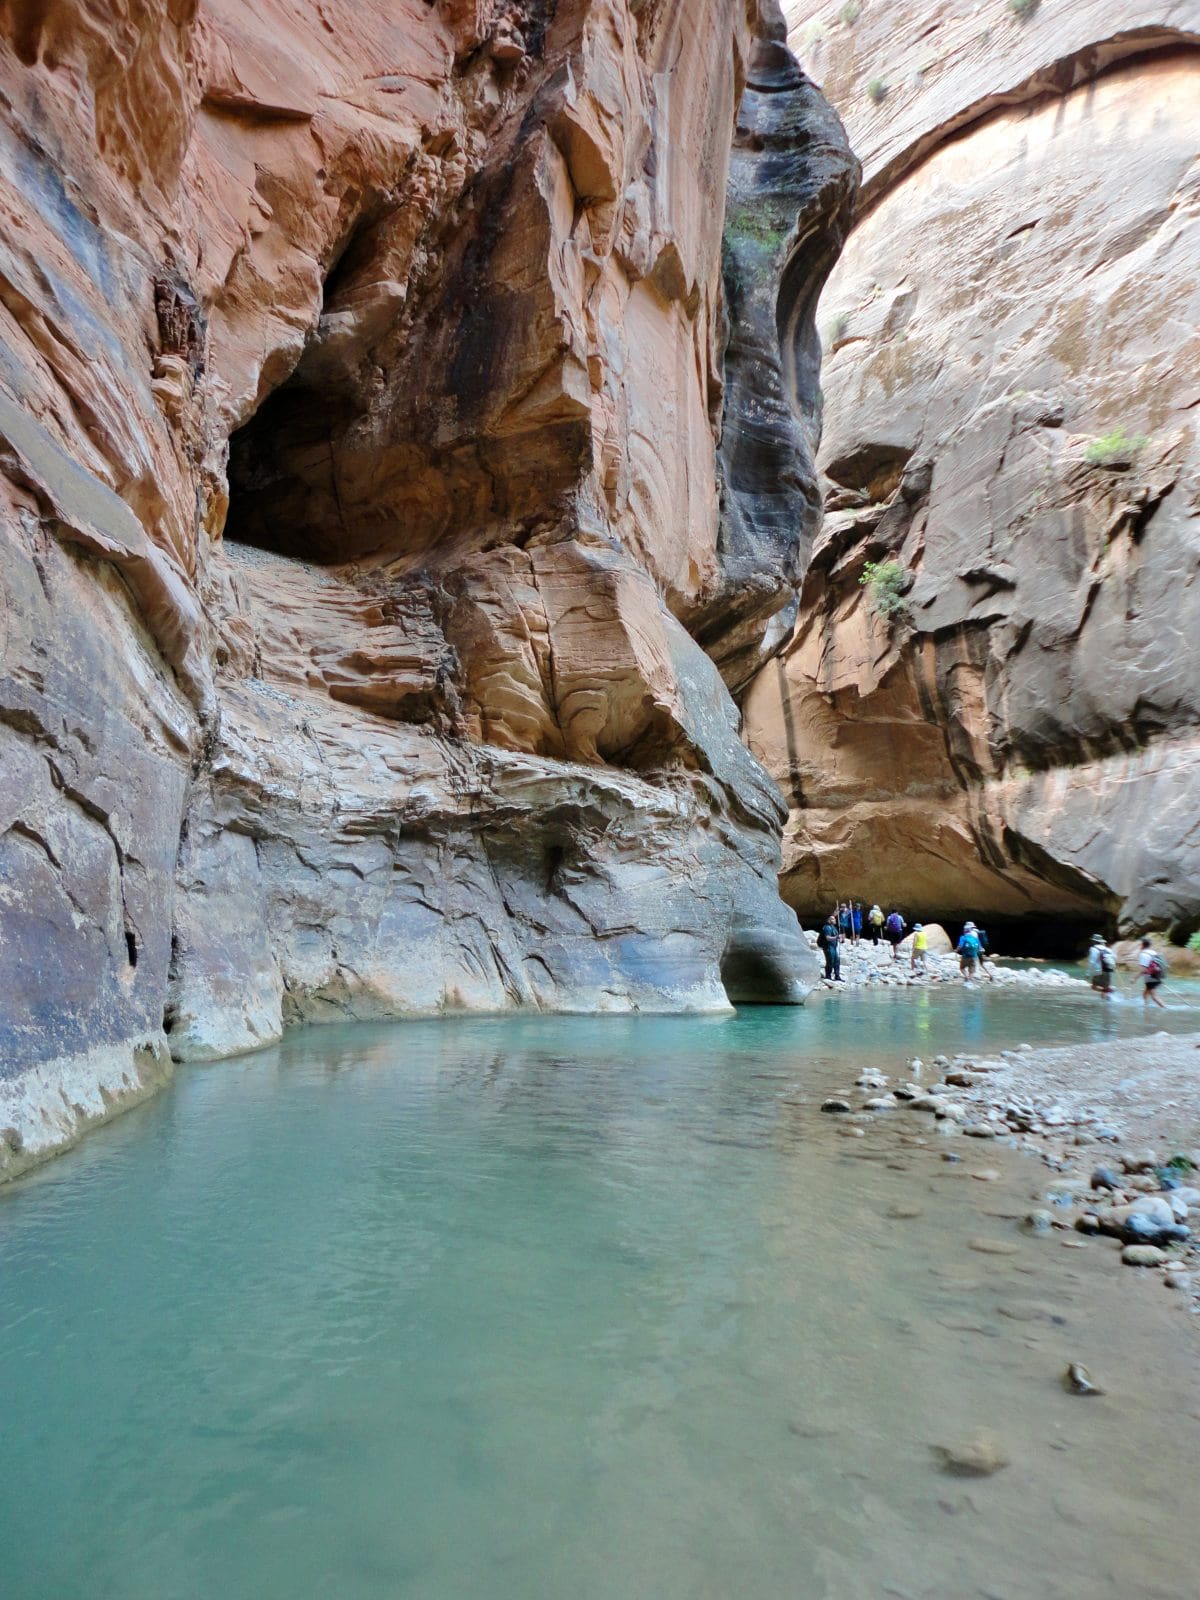 best hiking trails in zion national park, the Narrows trail, view of the Virgin River and tall walls of the canyon